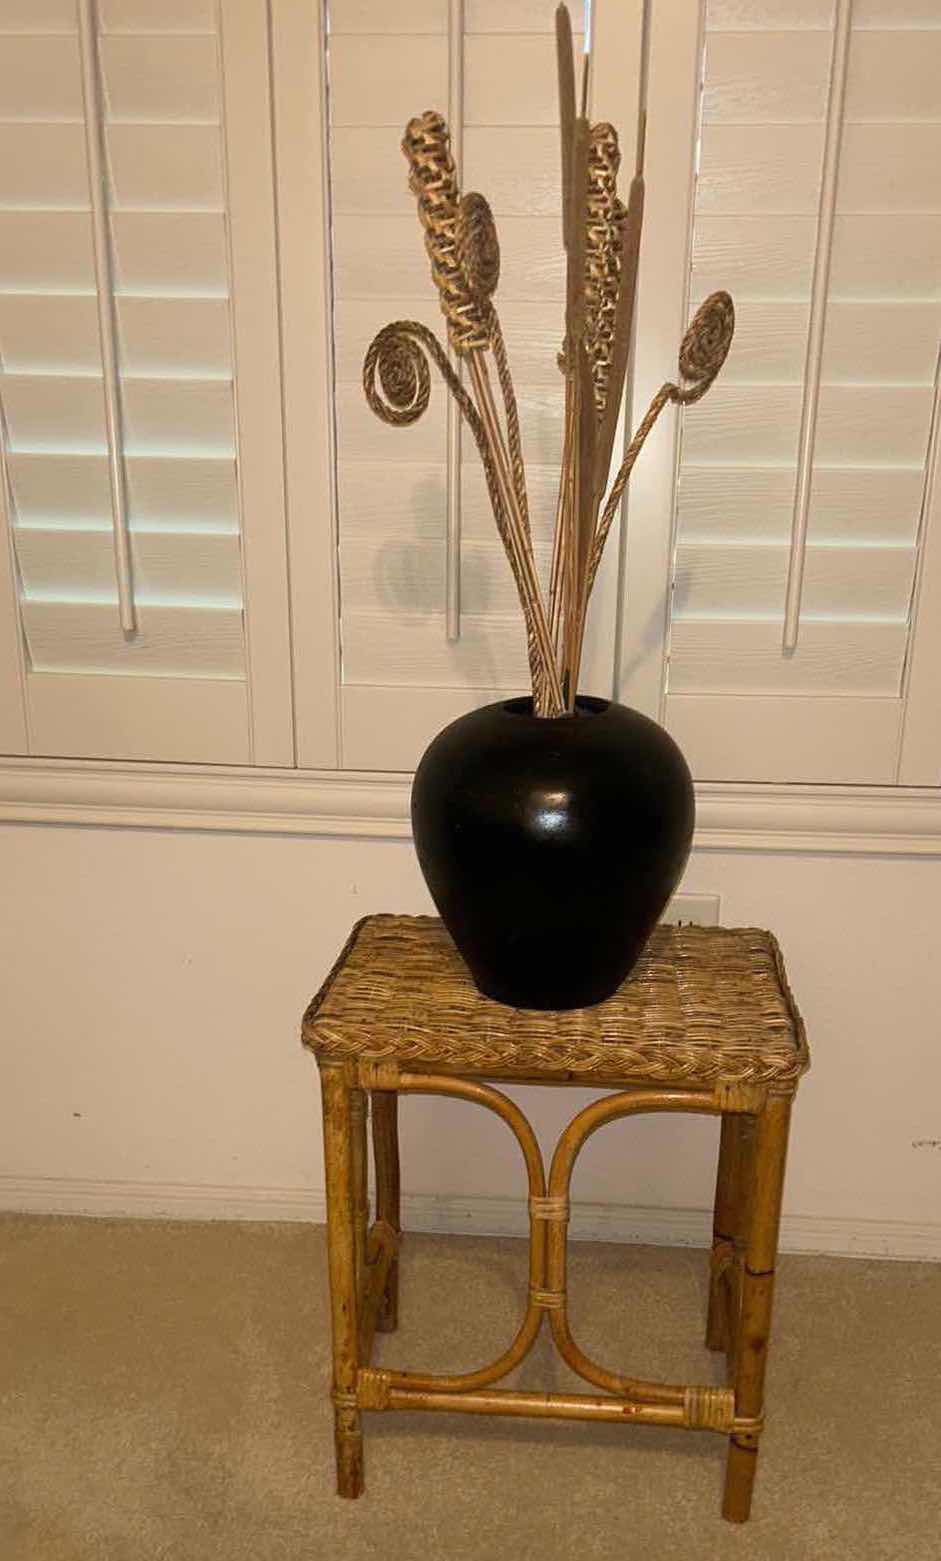 Photo 6 of SMALL RATAN TABLE (16 1/4“ x 11 1/2“ x 18 1/2“) WITH VASE AND RATAN REEDS